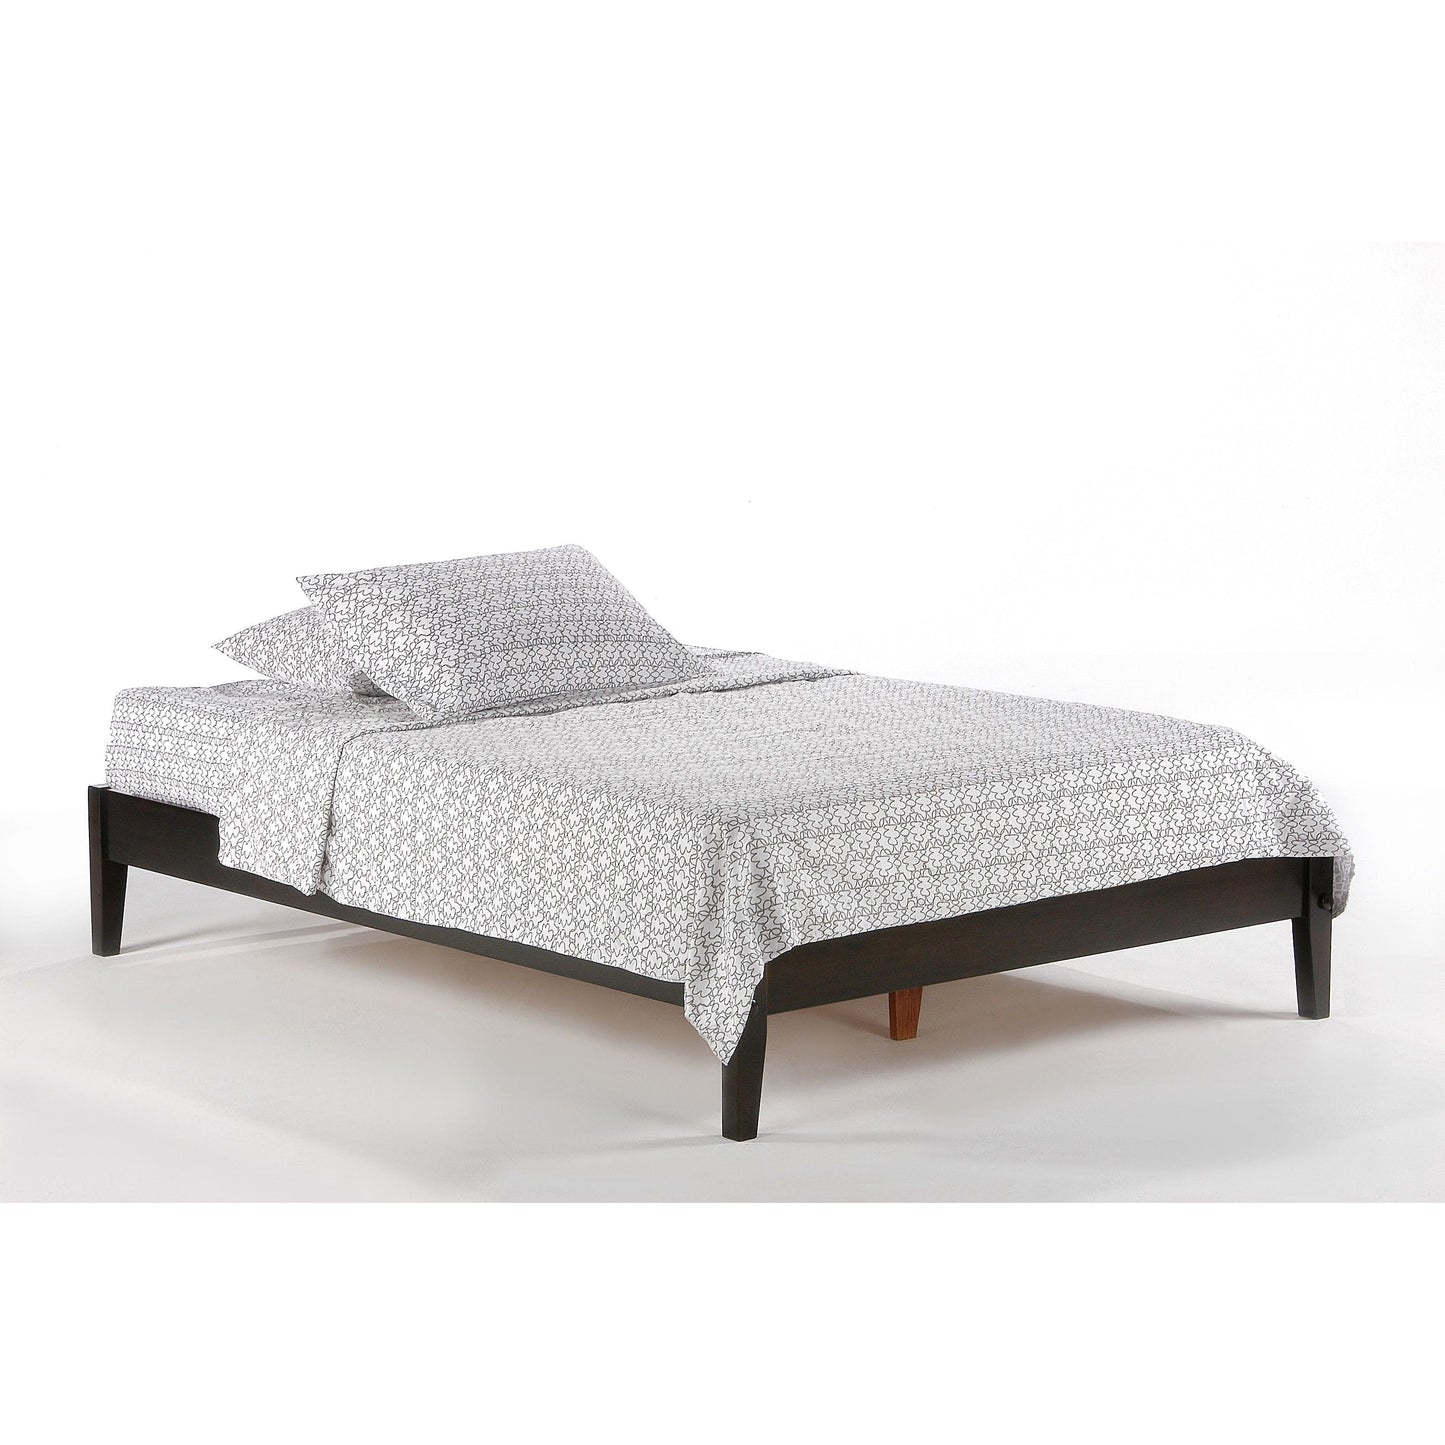 Night And Day Basic Queen Platform Bed in cherry finish (P Series) BAS-QEN-COM-P-CH